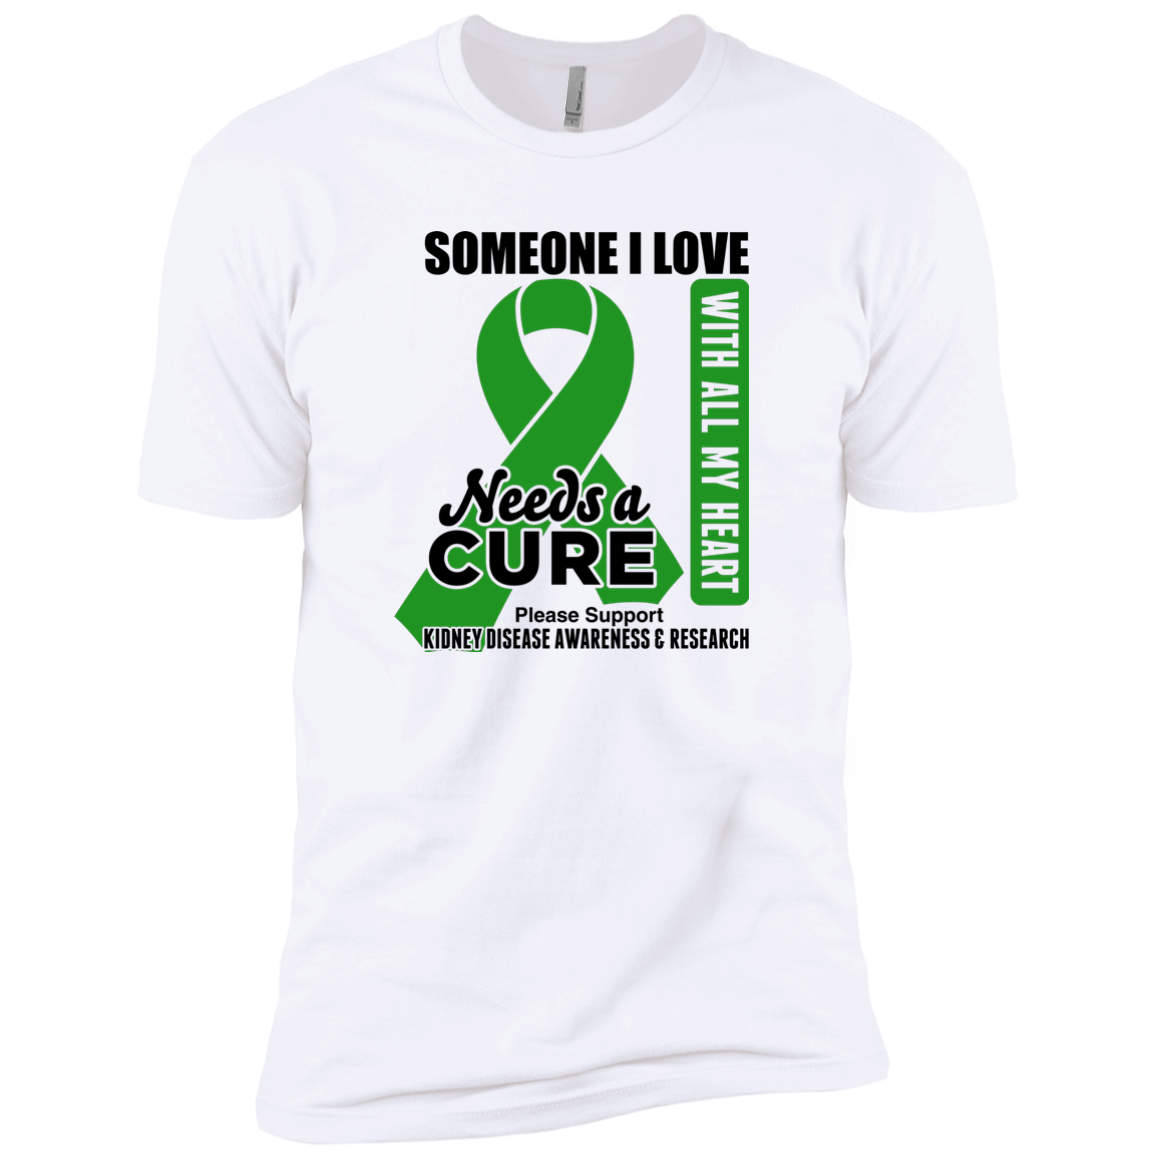 Someone I Love needs A Cure Kidney Disease